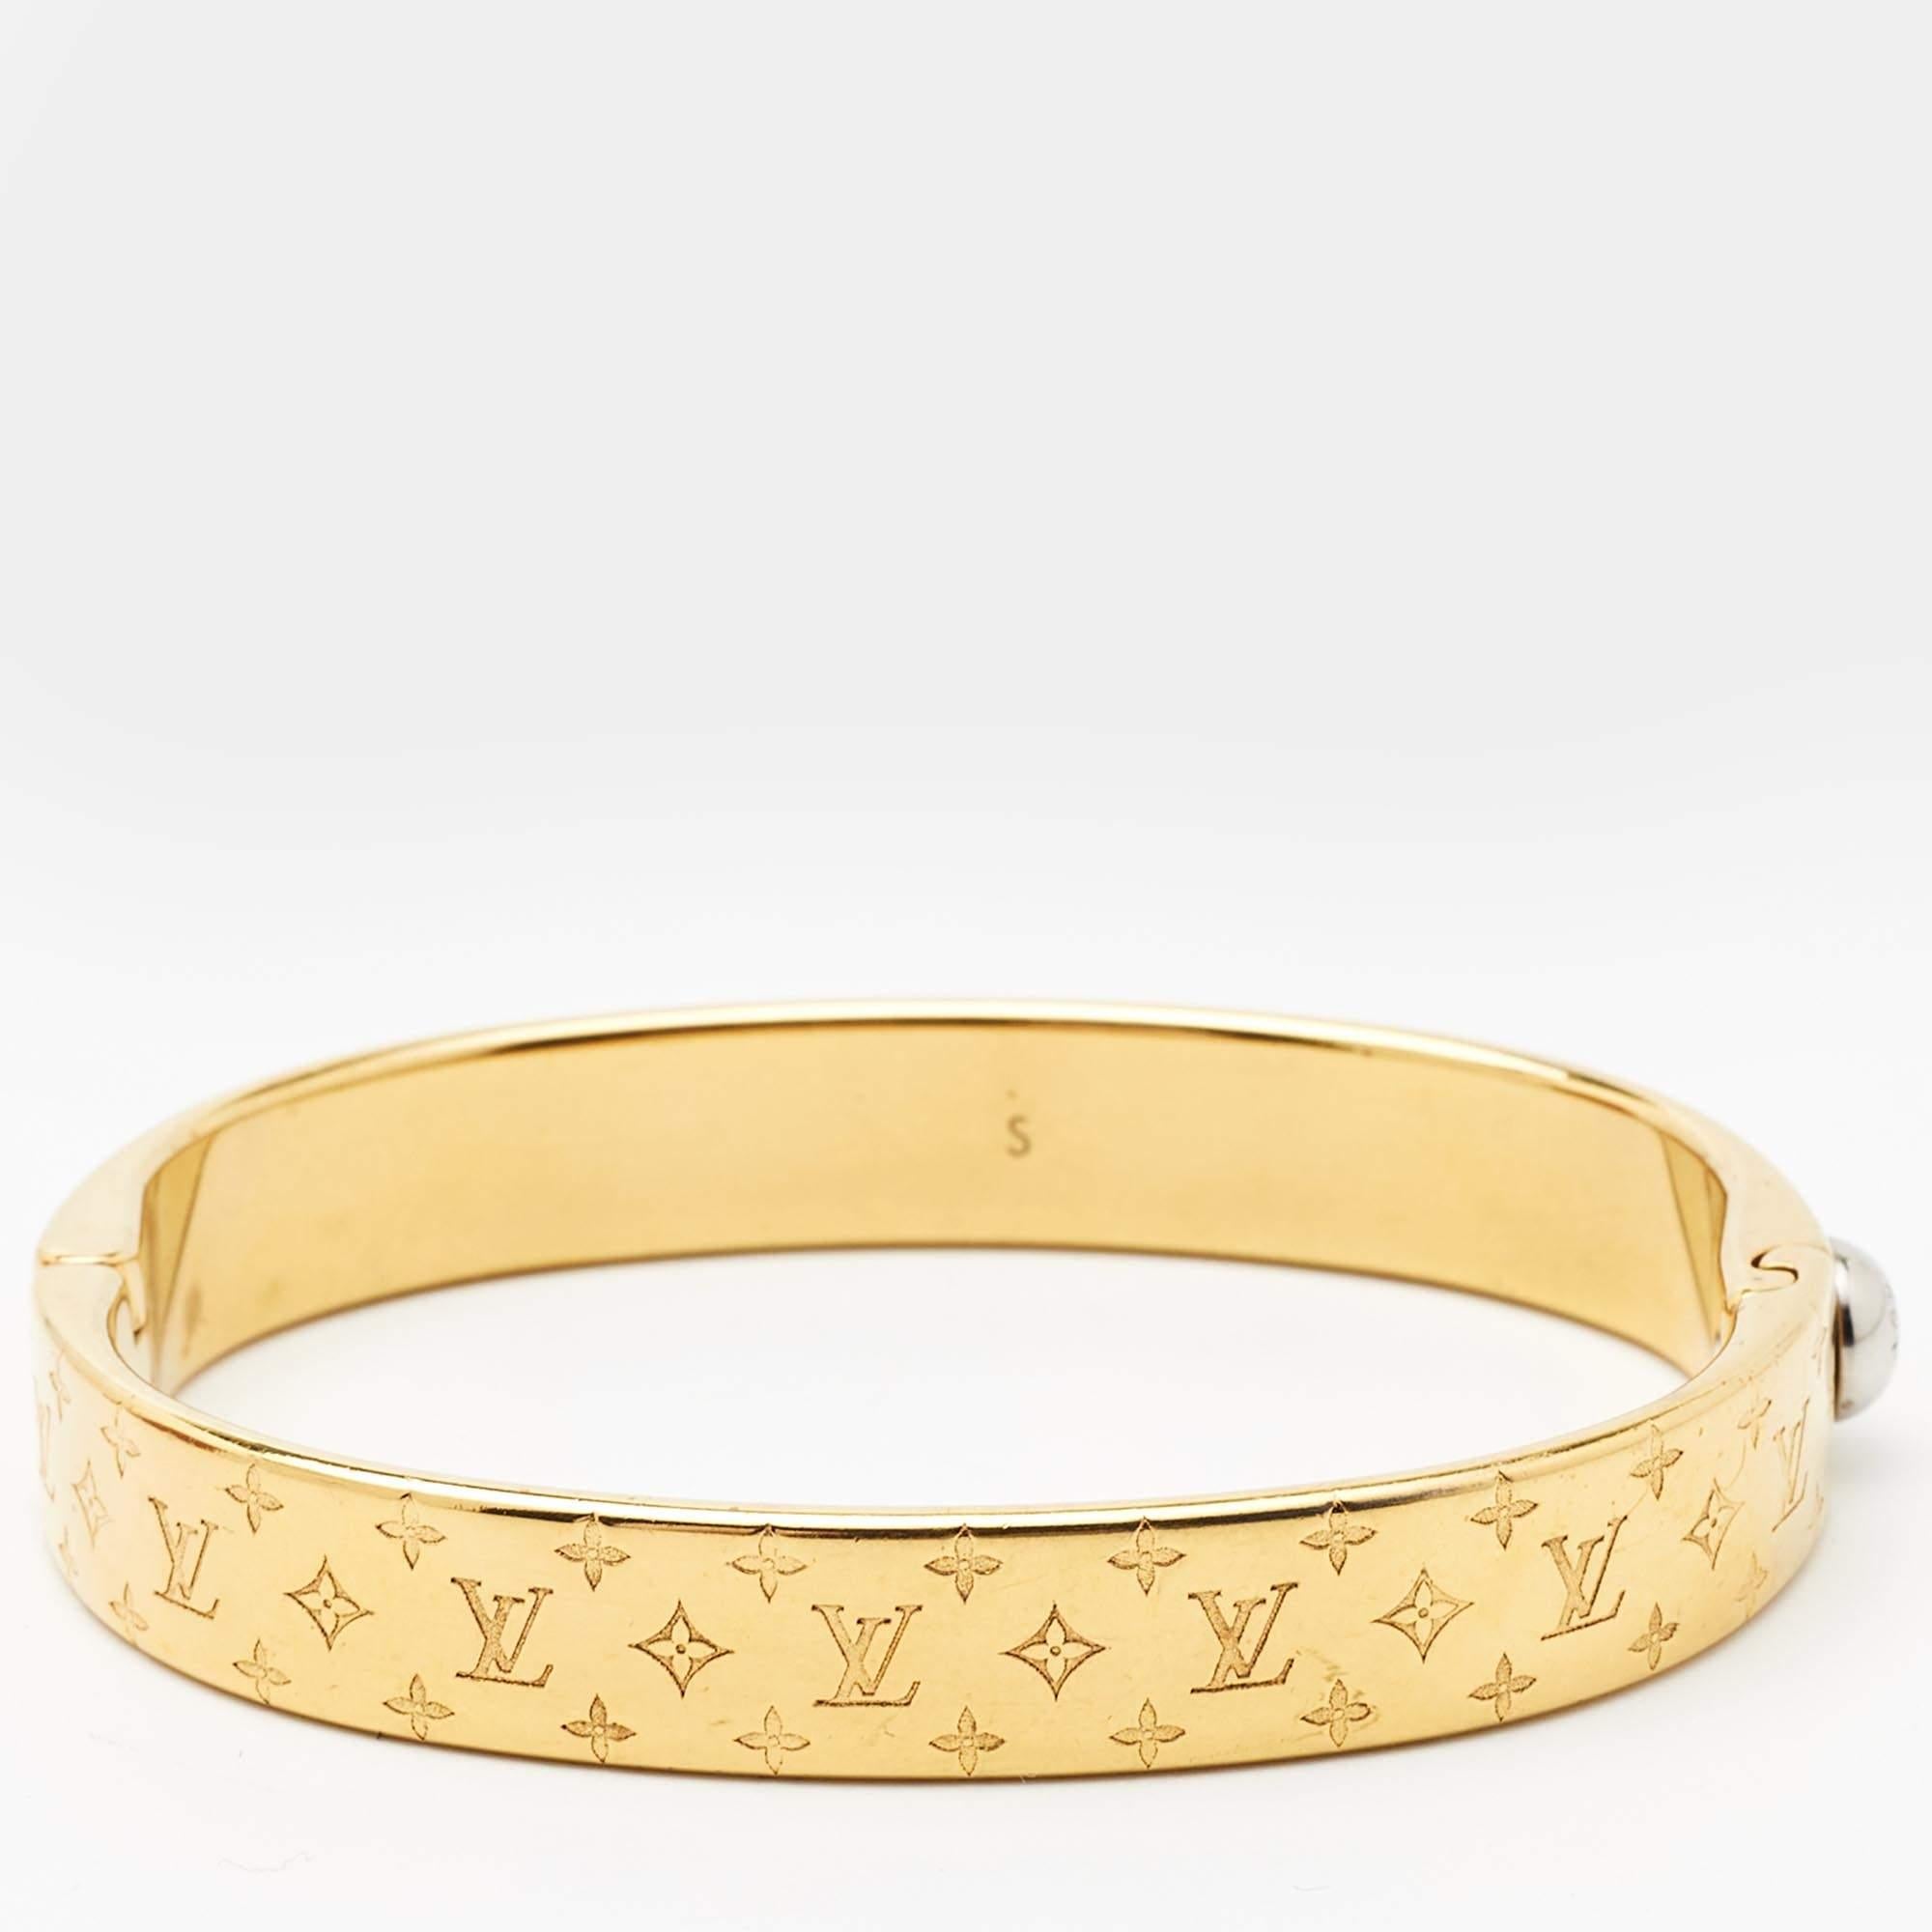 Create an elegant, timeless, and classic addition to both casual and even special events with this beautiful Louis Vuitton Nanogram bracelet. Constructed in two-tone metal, this bracelet features the iconic Monogram all over.

Includes: Original